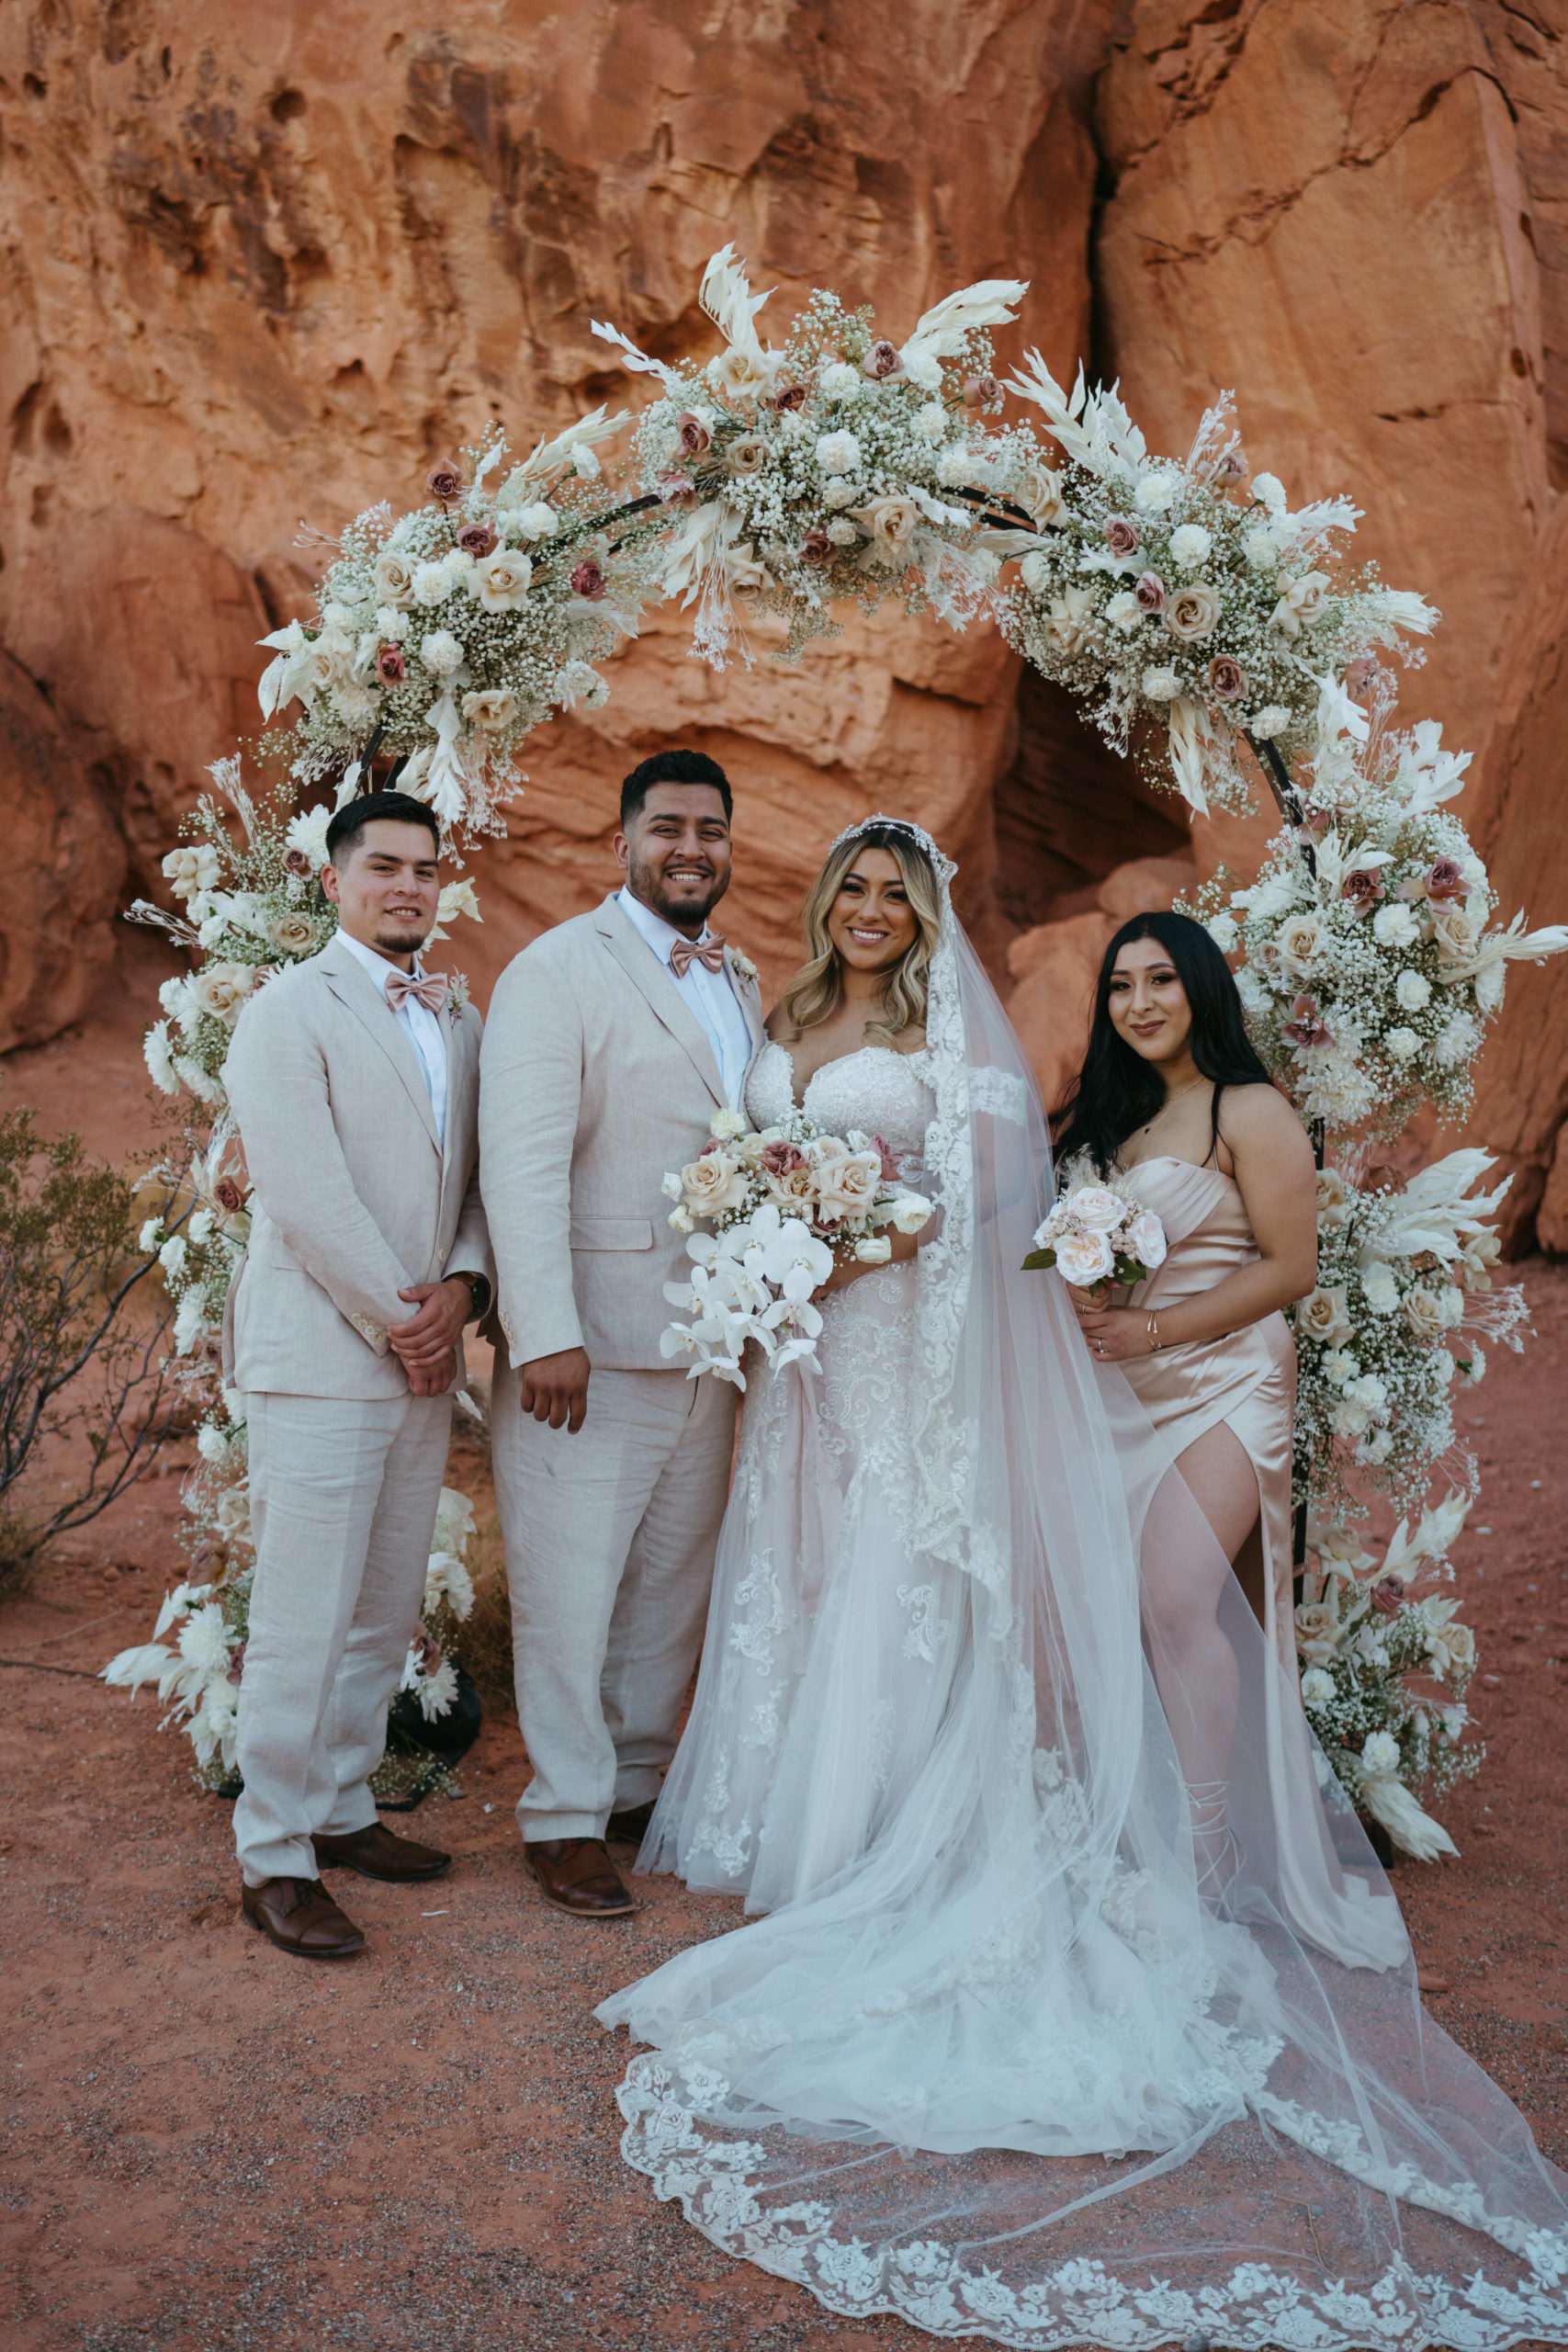 Modern Monochromatic Desert Micro-Wedding. The bride and groom take a photo with the maid of honor and best man